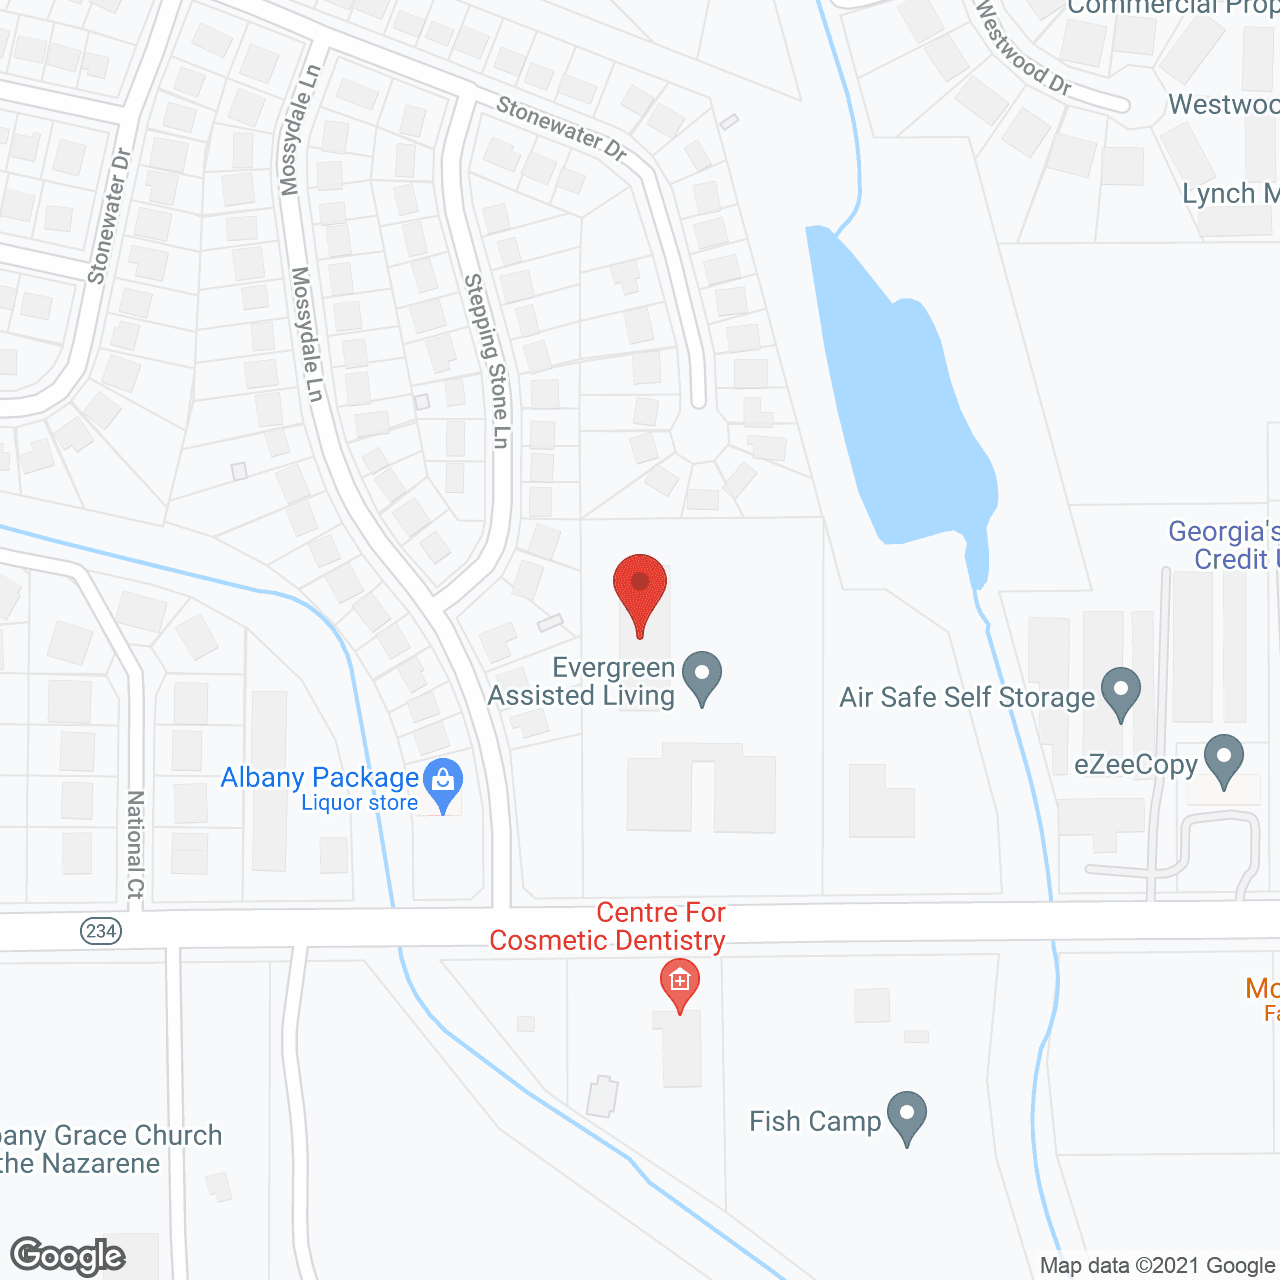 Century Pines and Evergreen Senior Living in google map